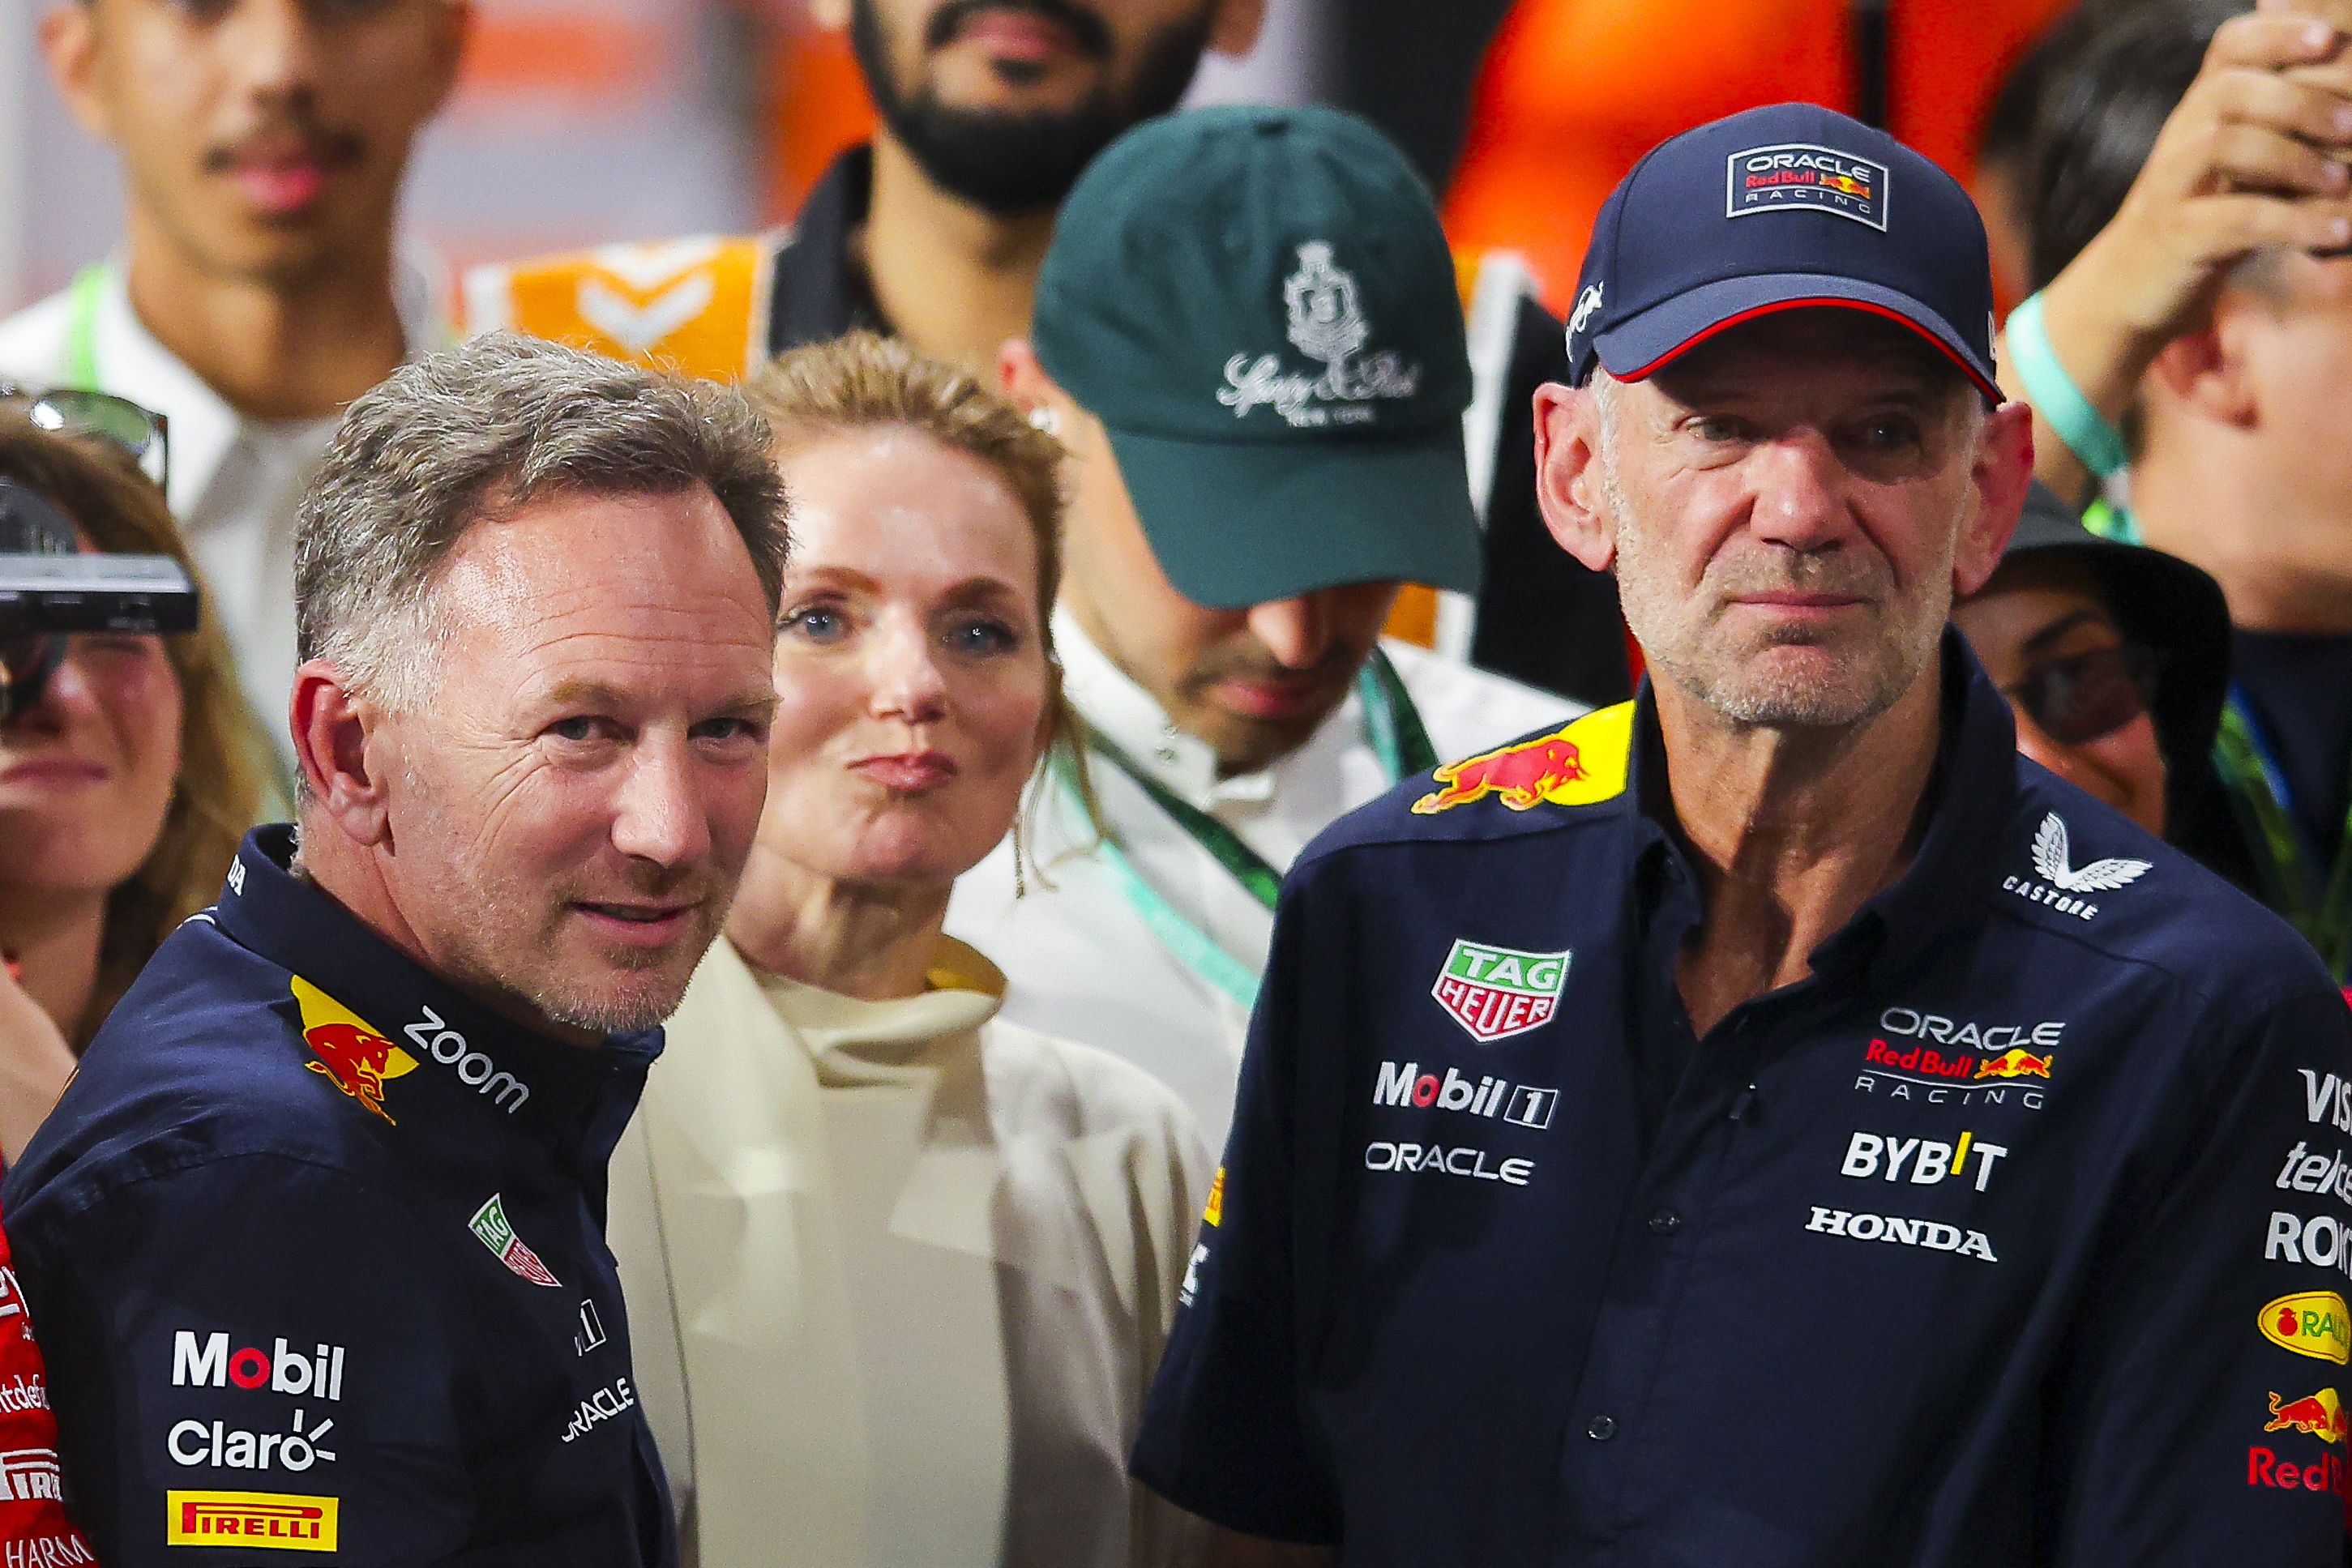 red bull to lose key man amid horner scandal